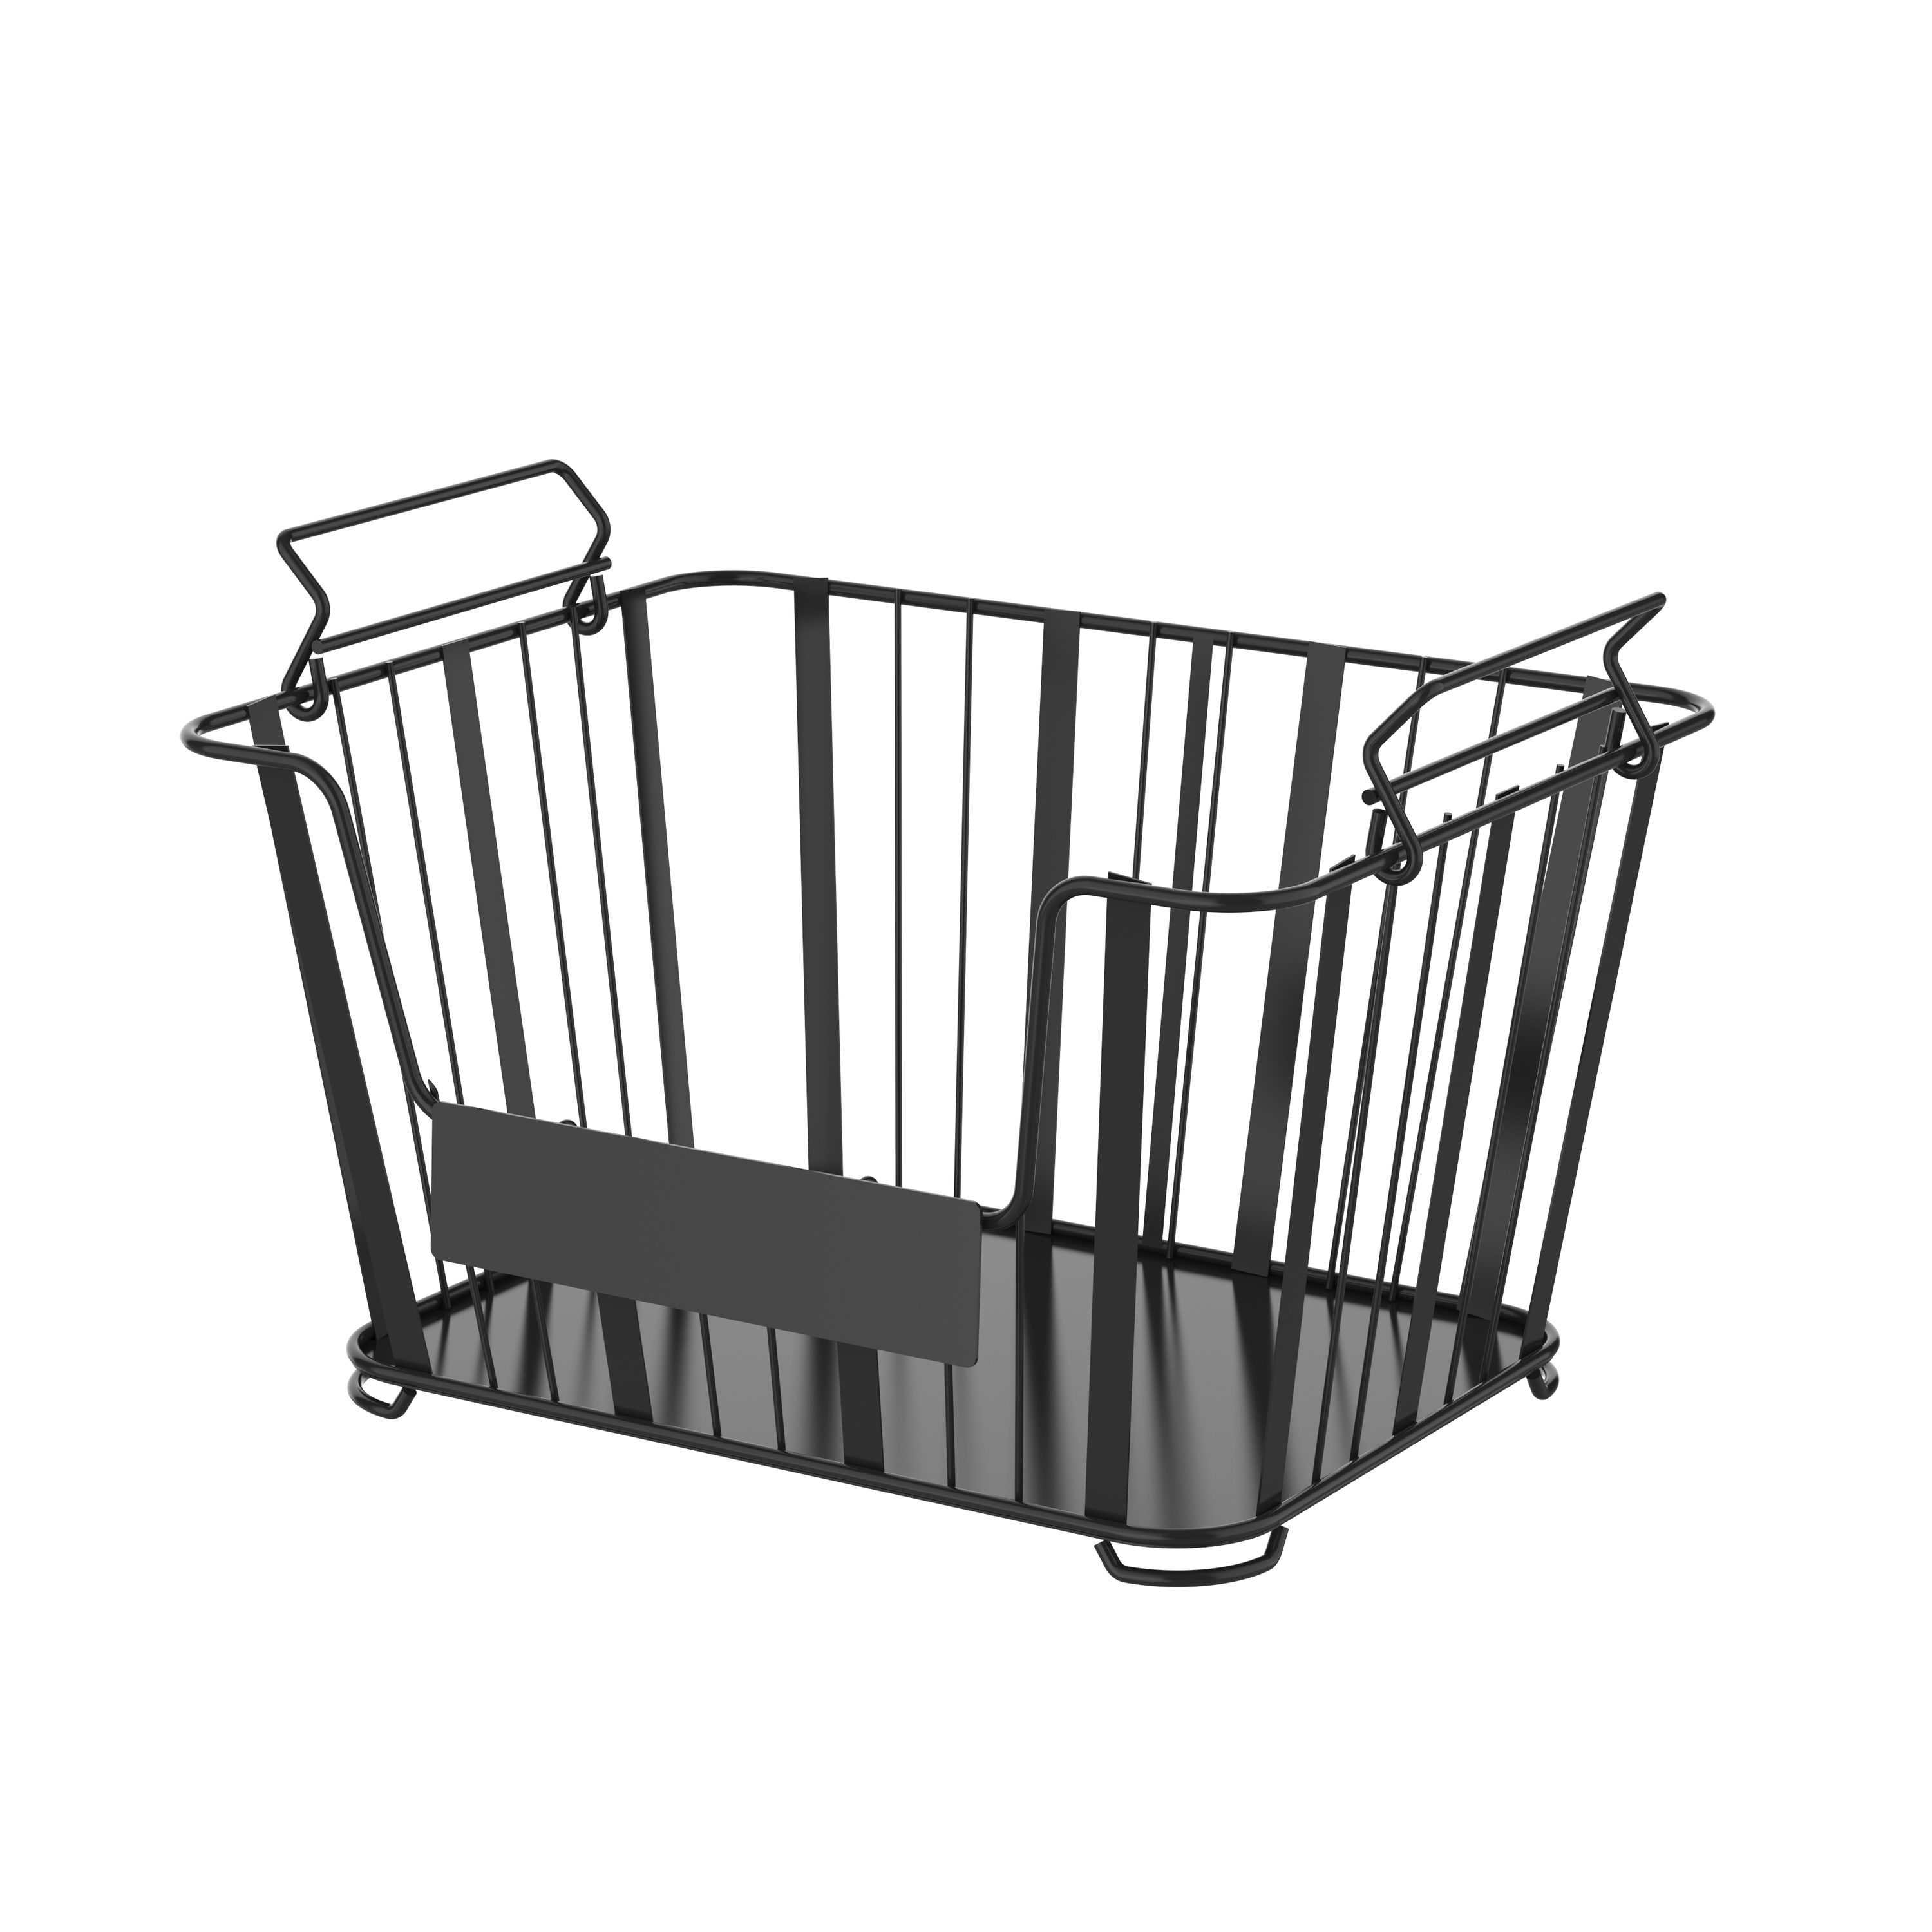 Oceanstar Oceanstar 3-Tier Metal Wire Stand with Removable Baskets – Black in the Storage Bins & Baskets department at Lowes.com